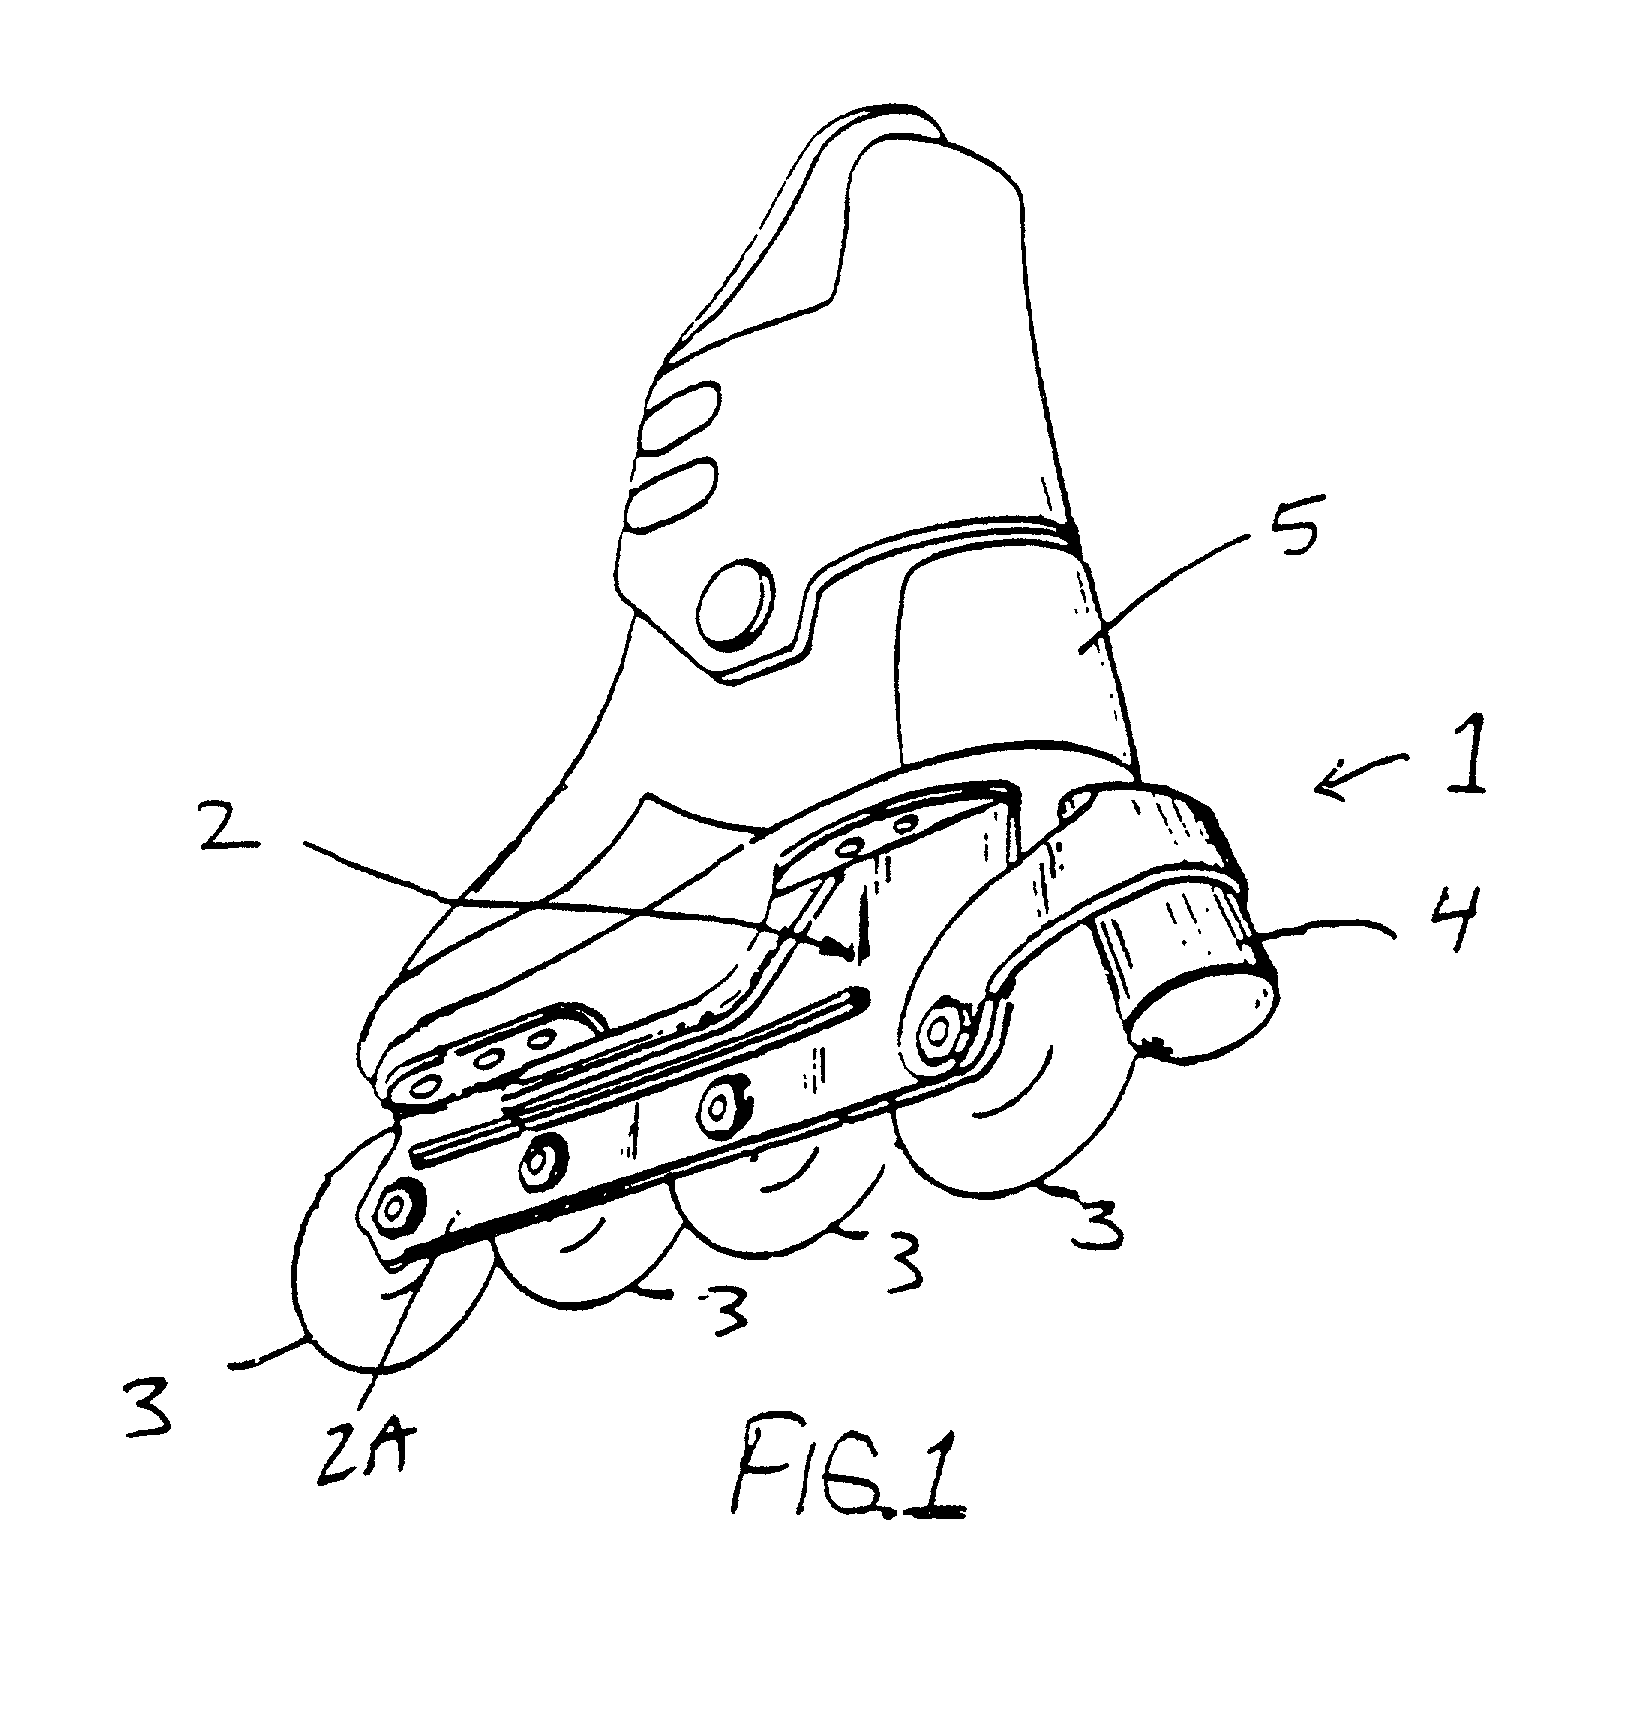 In-line roller skates having quick-release axle system with safety retaining pin mechanism